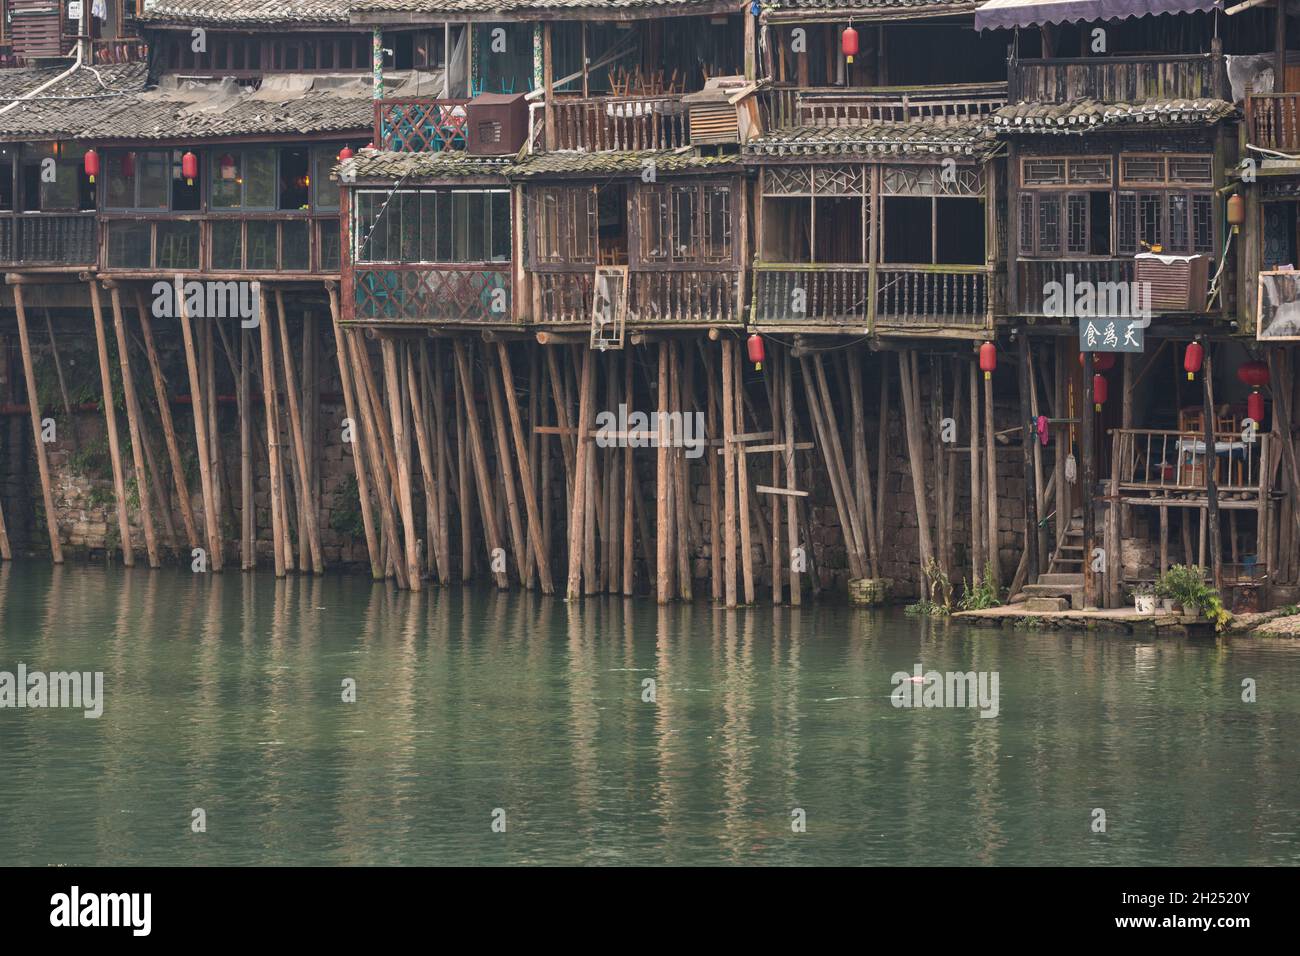 Traditional Diaojiao houses on stilts along the banks of the Tuojiang River.  Ancient town of Fenghuang, China. Stock Photo